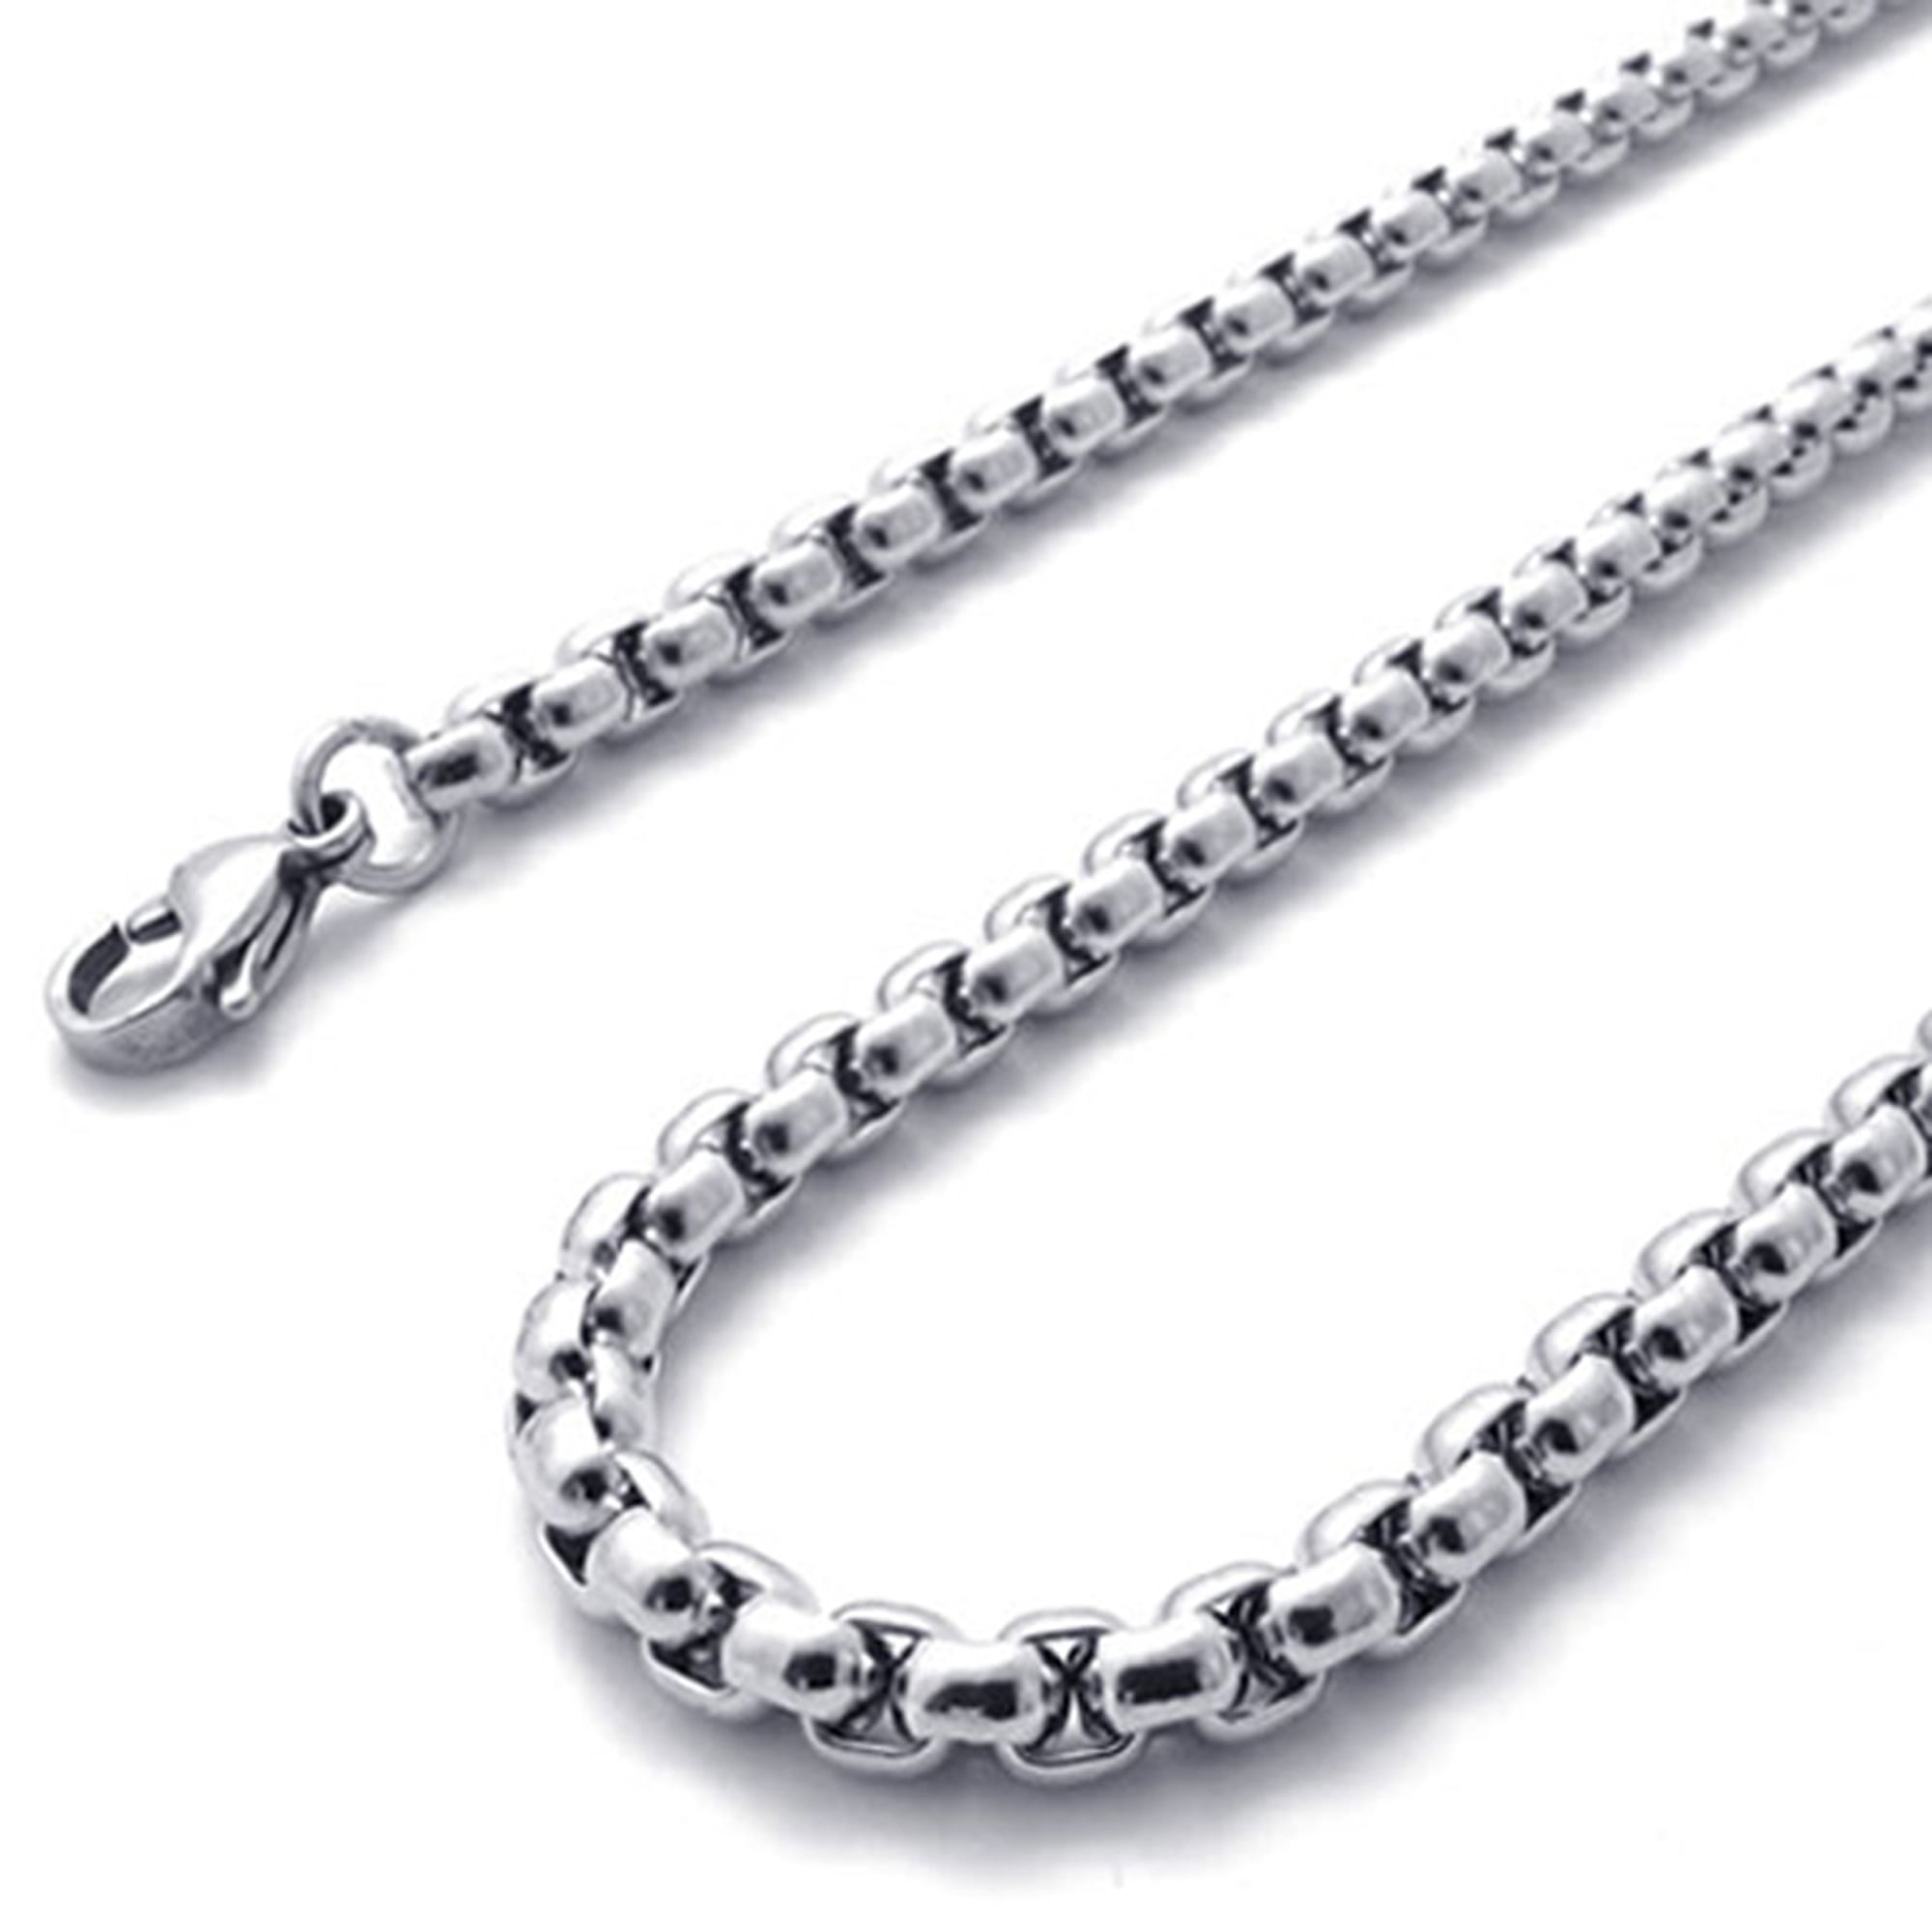 36" Details about   New  4 Ga Black Painted  Steel Oval Chain #18. 